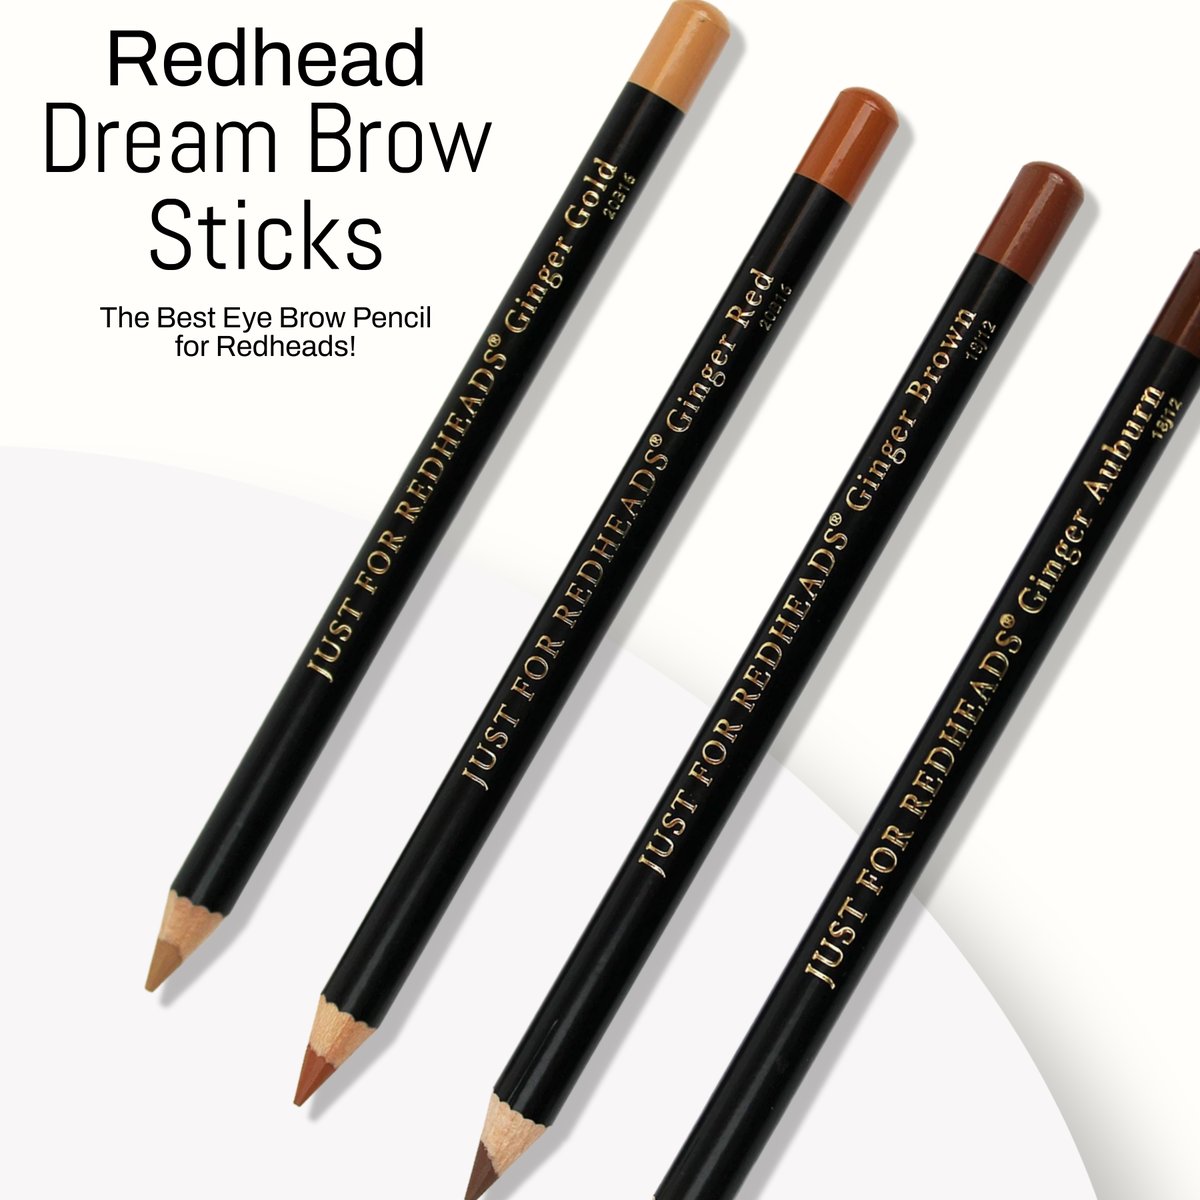 Calling all Redheads! Tired of struggling to find the perfect brow pencil to match your fiery locks? Look no further! JFR’s Redhead Dream Brow Stick – your new go-to for flawless brows that match your natural beauty.
justforredheads.com/redhead-dream-…
#justforredheadsofficial #ginger